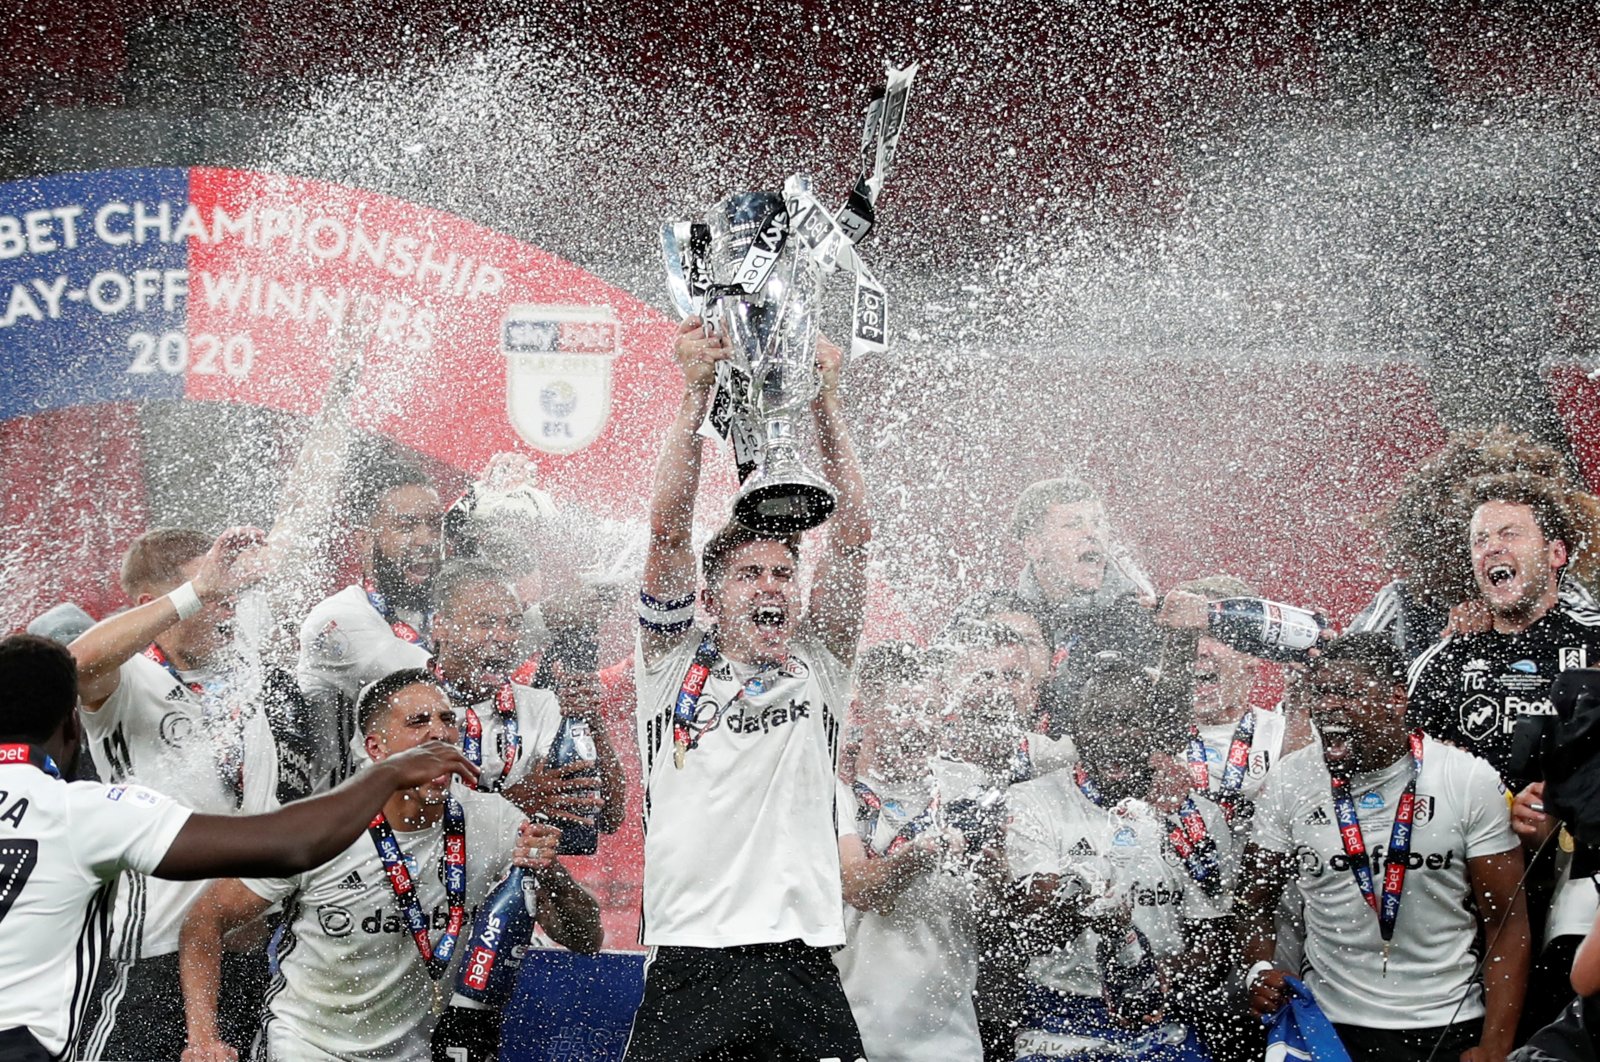 Fulham's Tom Cairney lifts EFL Championship trophy as he celebrates promotion to the Premier League with teammates after winning the playoff match against Bentford in London, Britain, Aug. 4, 2020. (Reuters Photo)